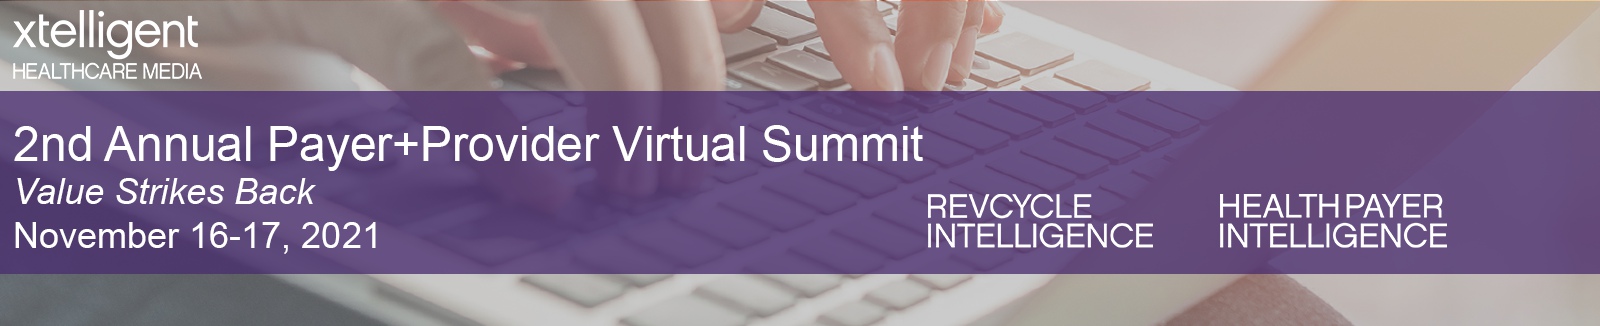 2nd Annual Payer+Provider Virtual Summit